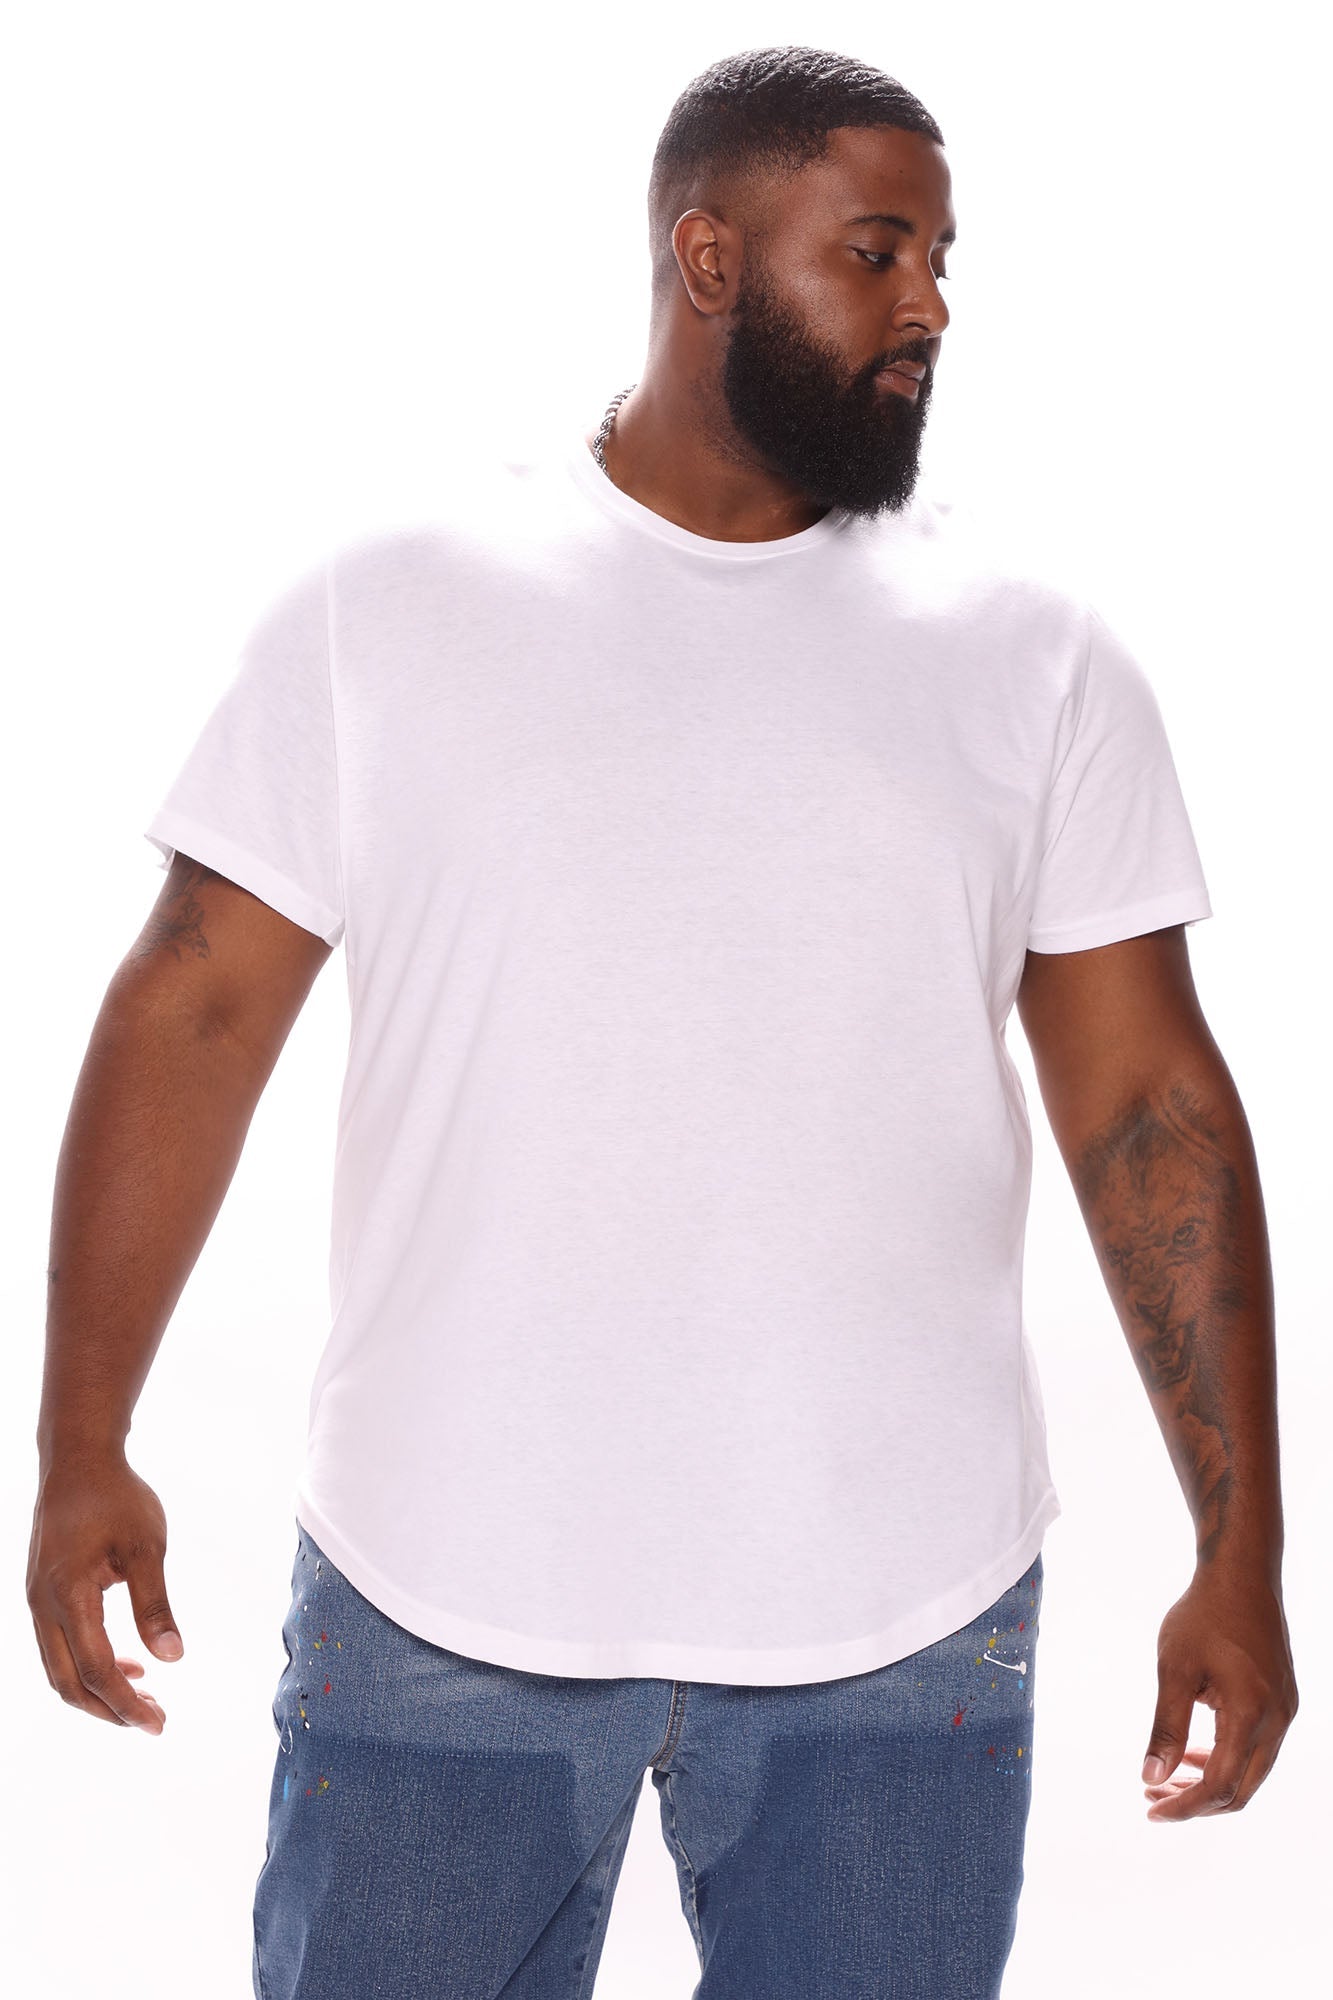 Classic Elegance: The Essential Scallop Tee in White